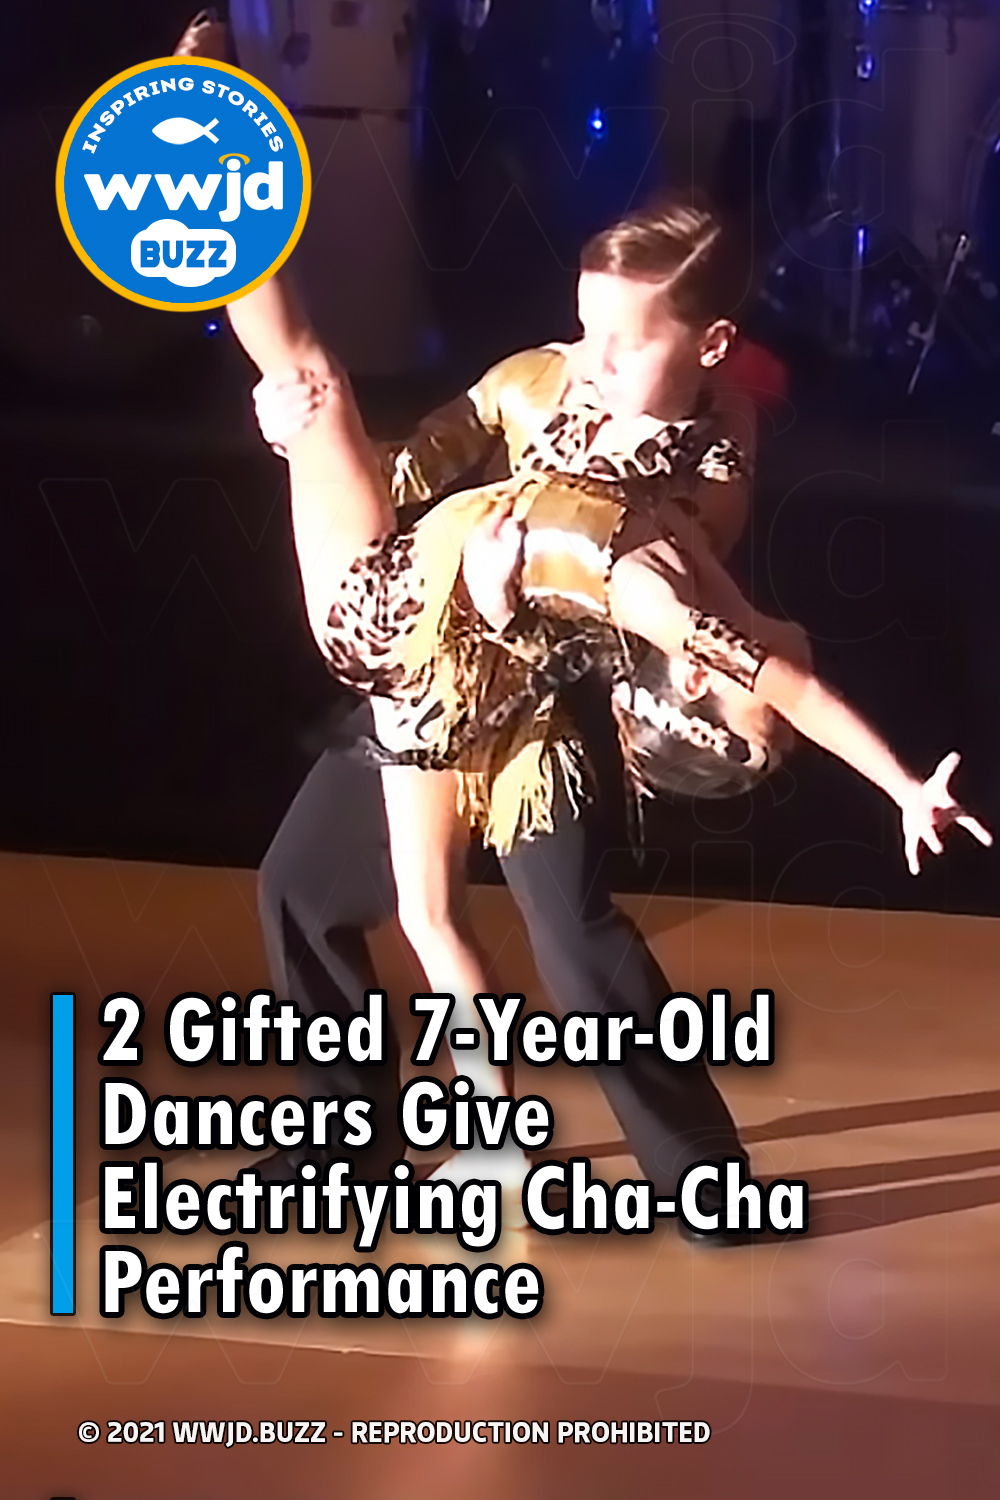 2 Gifted 7-Year-Old Dancers Give Electrifying Cha-Cha Performance